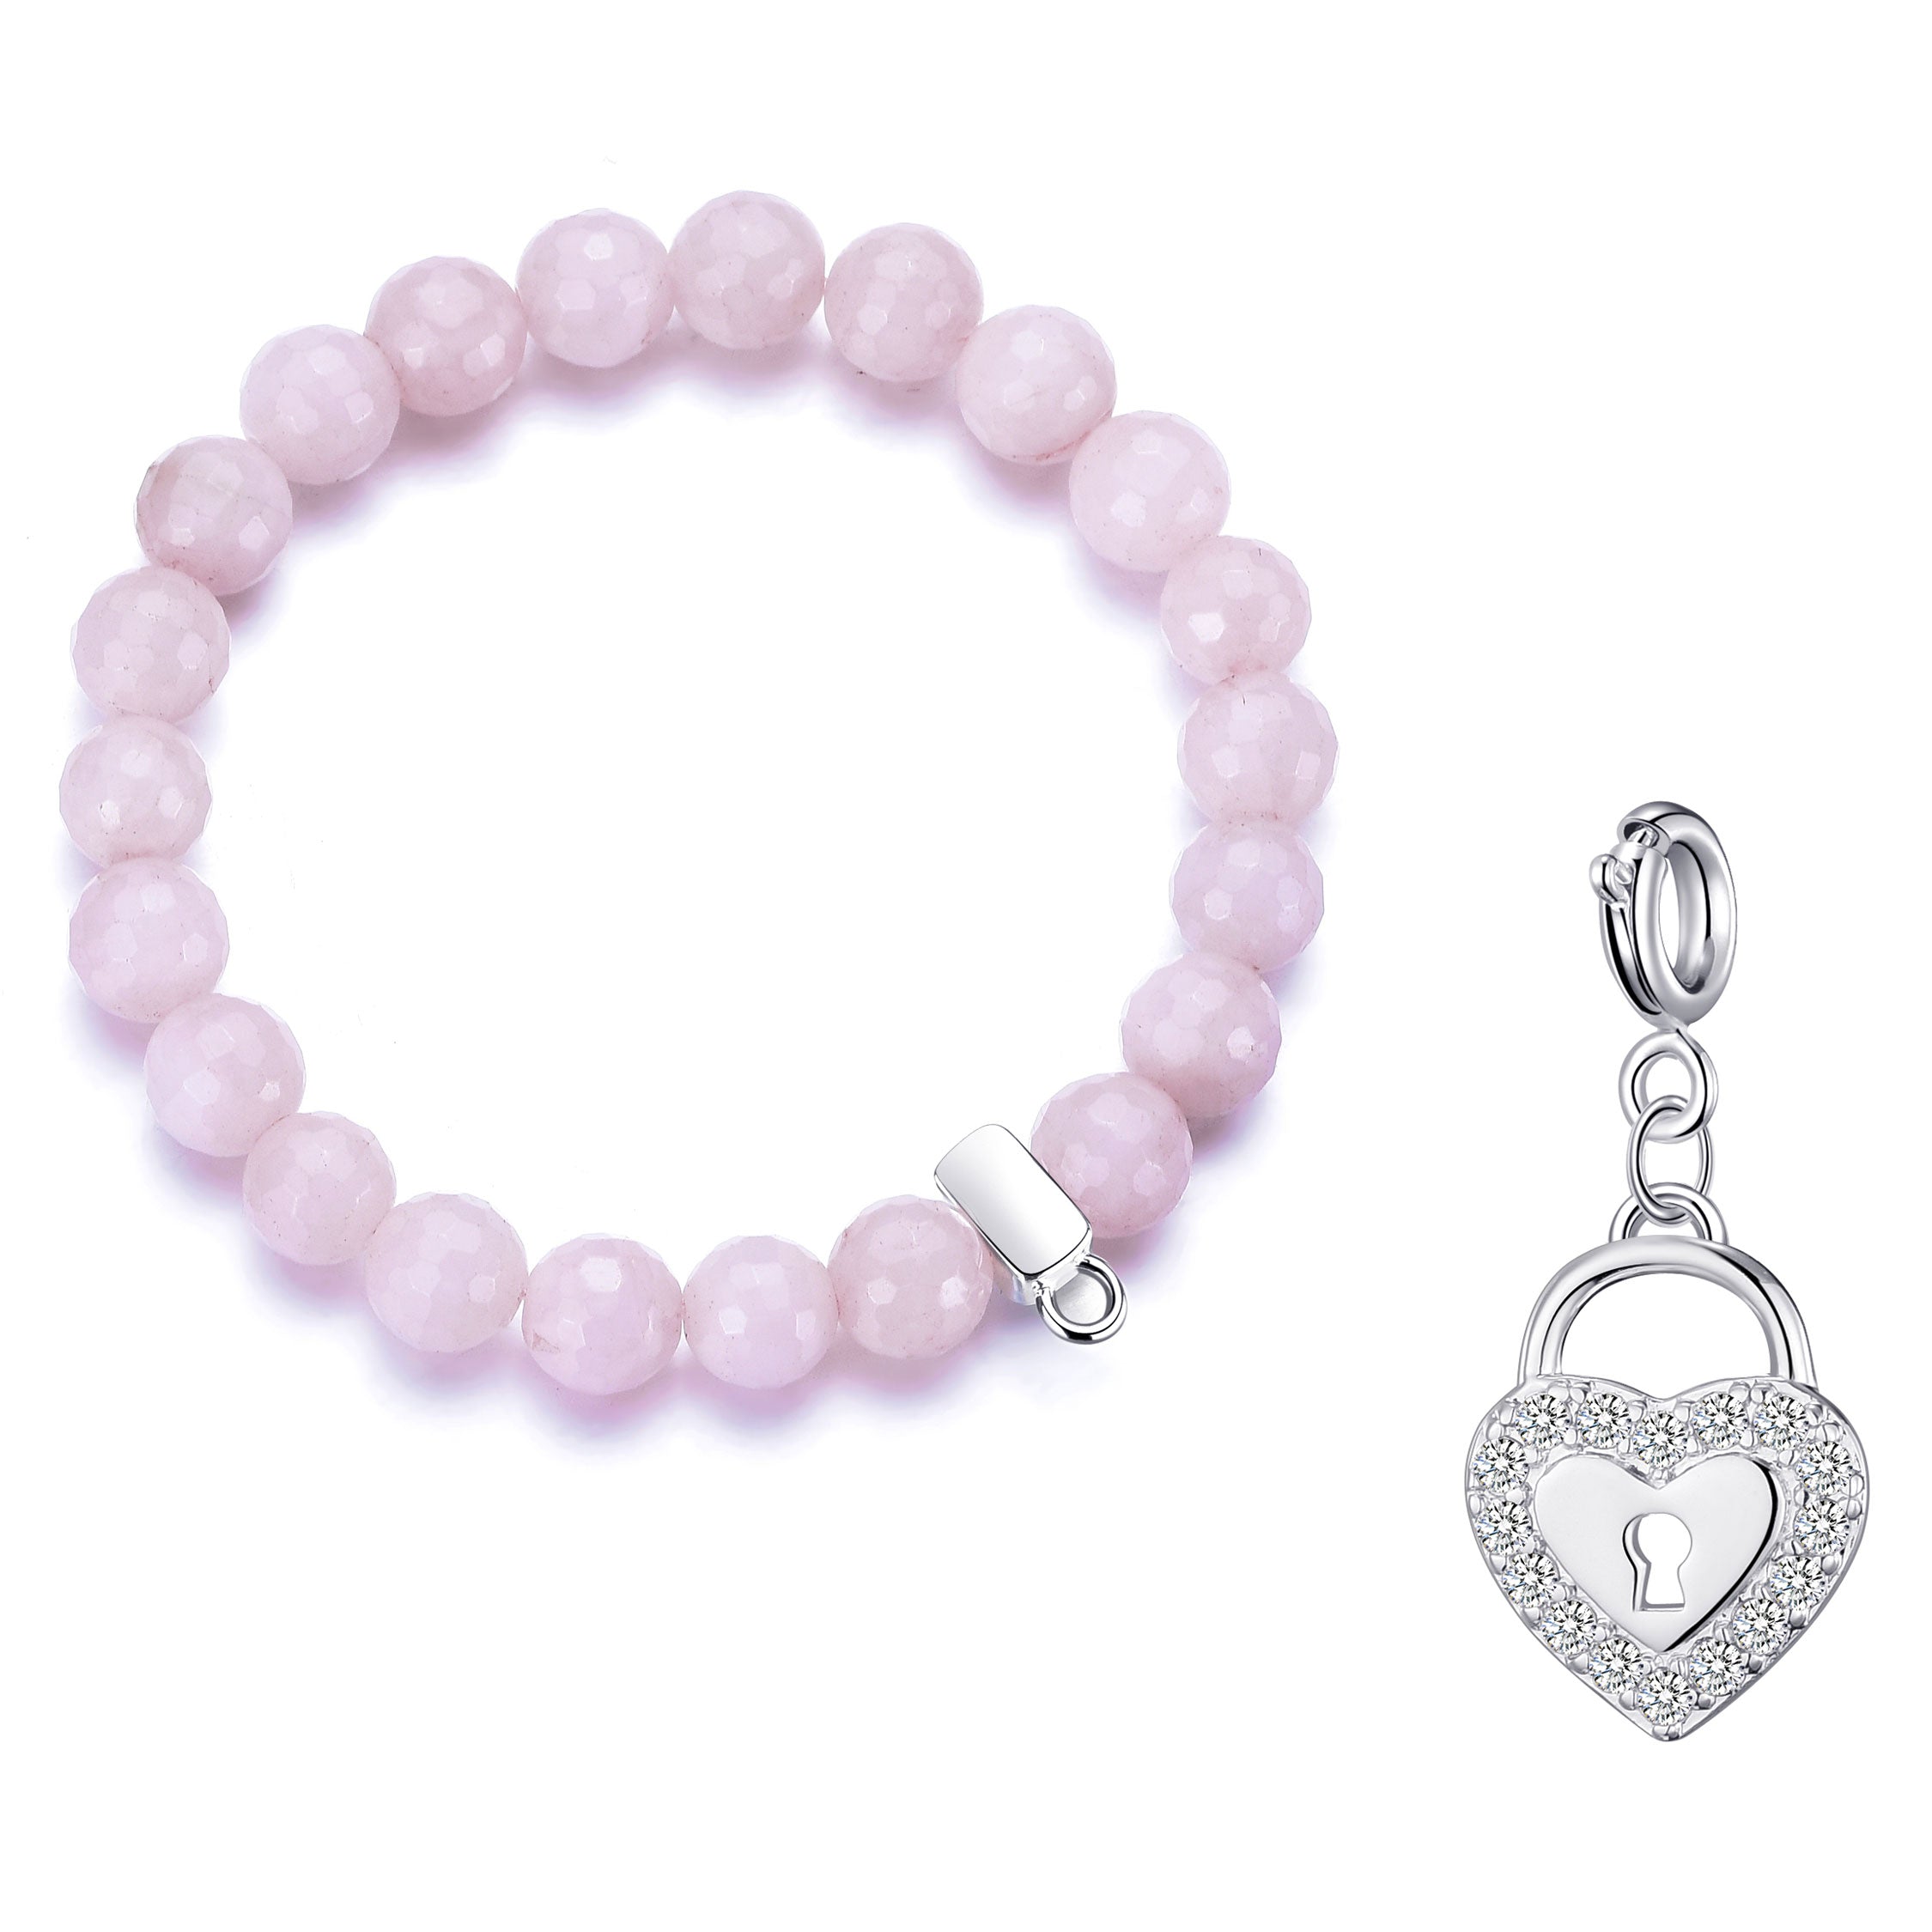 Faceted Rose Quartz Gemstone Stretch Bracelet with Charm Created with Zircondia® Crystals